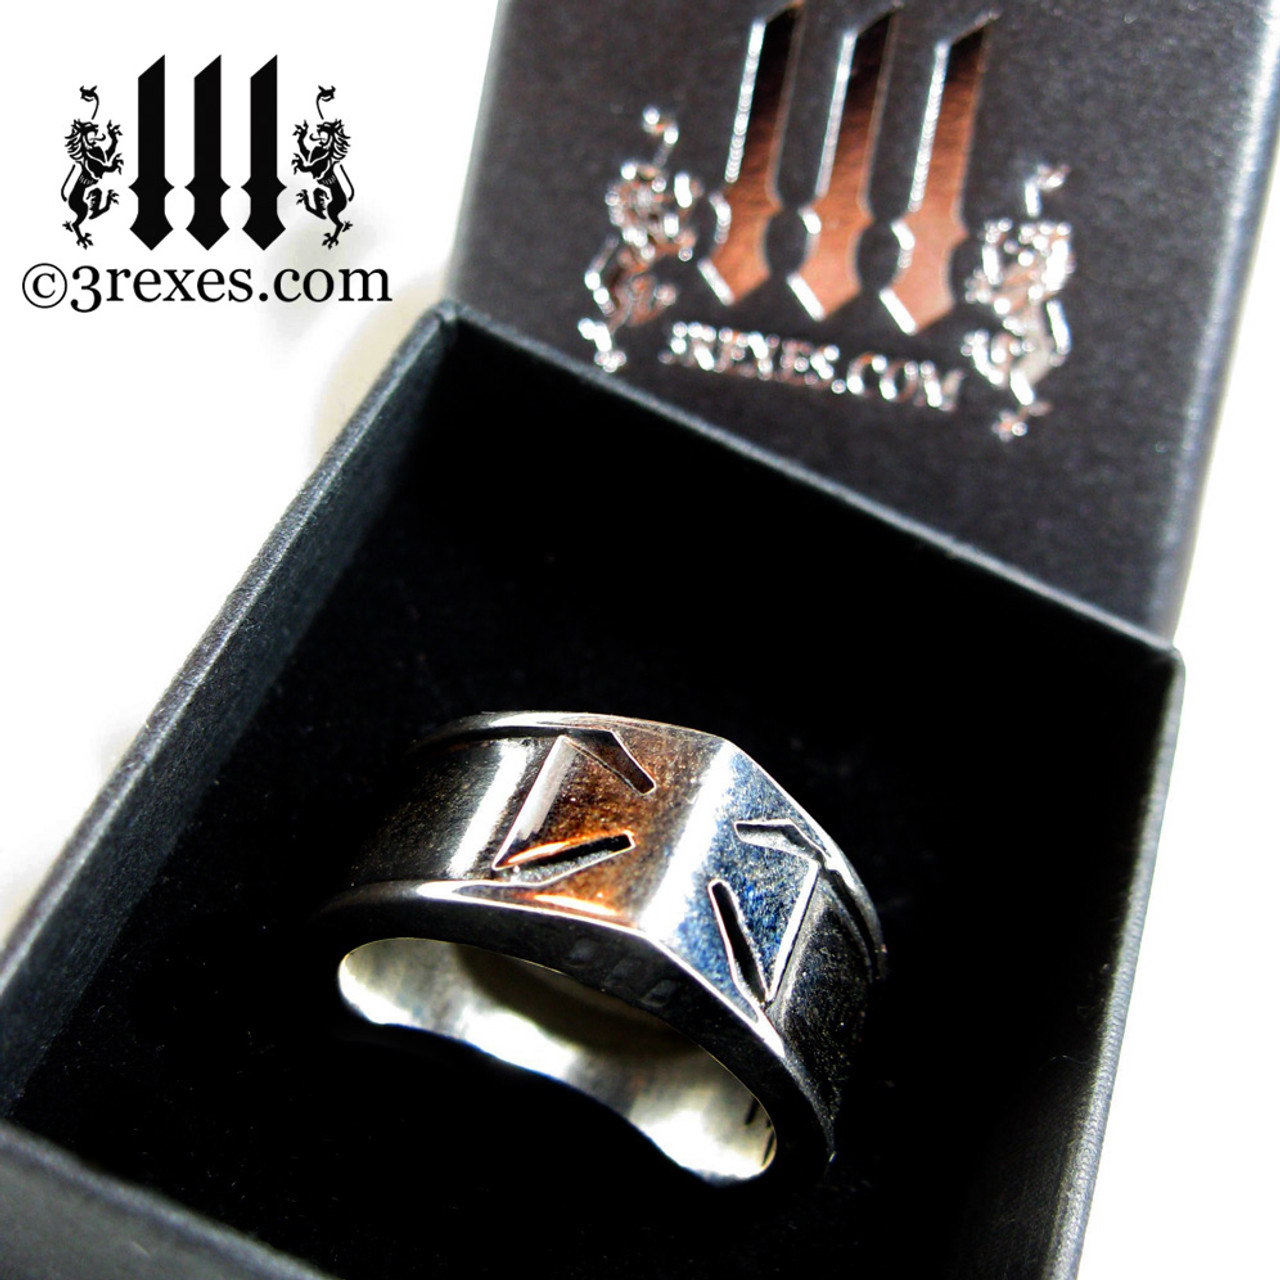 Buy Masonic Ring With S&C and Silver Fern and 14k Rose Gold Tools Handmade  Freemason Jewelry Online in India - Etsy